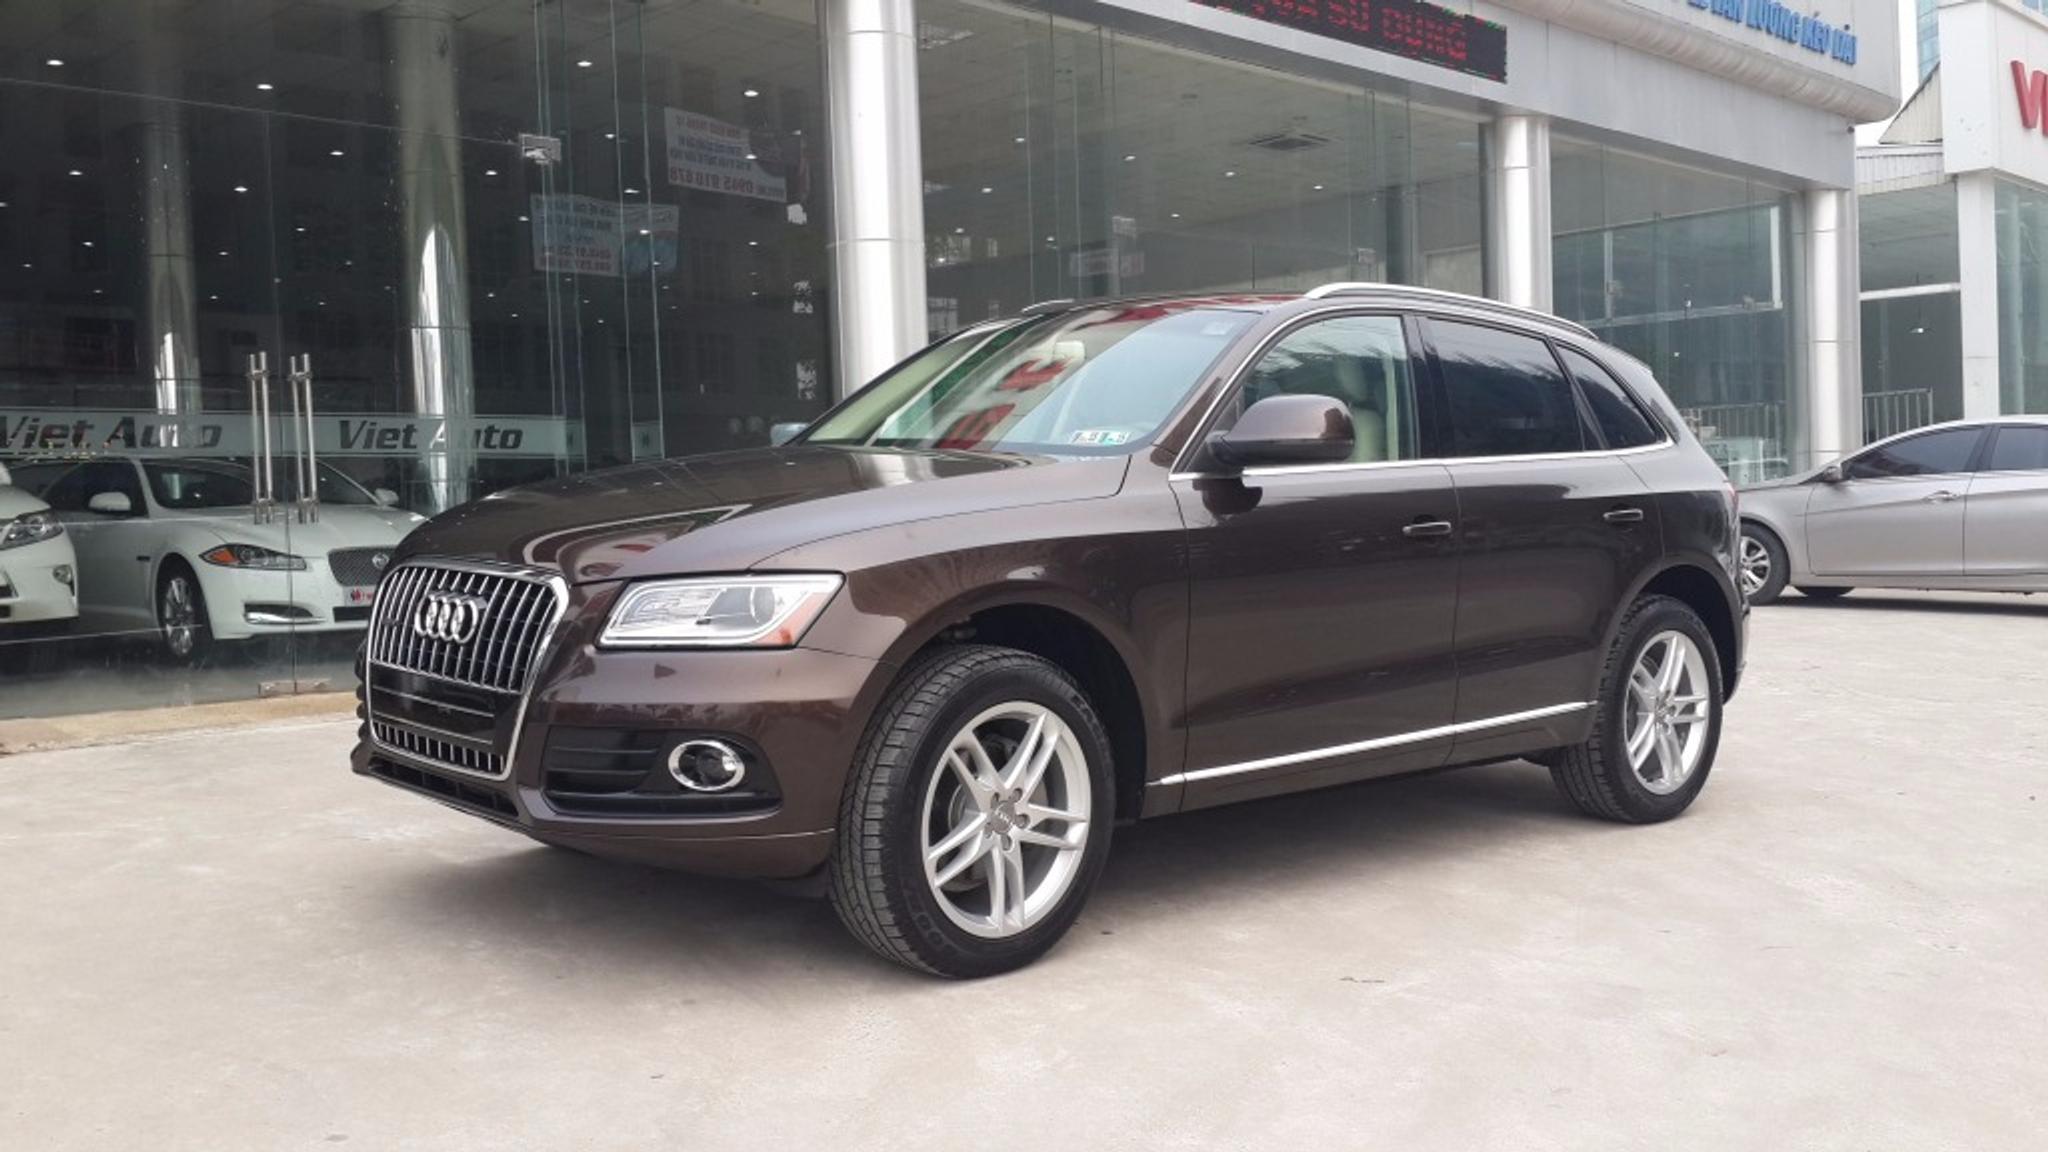 Brown Audi Q5 with tinted windows